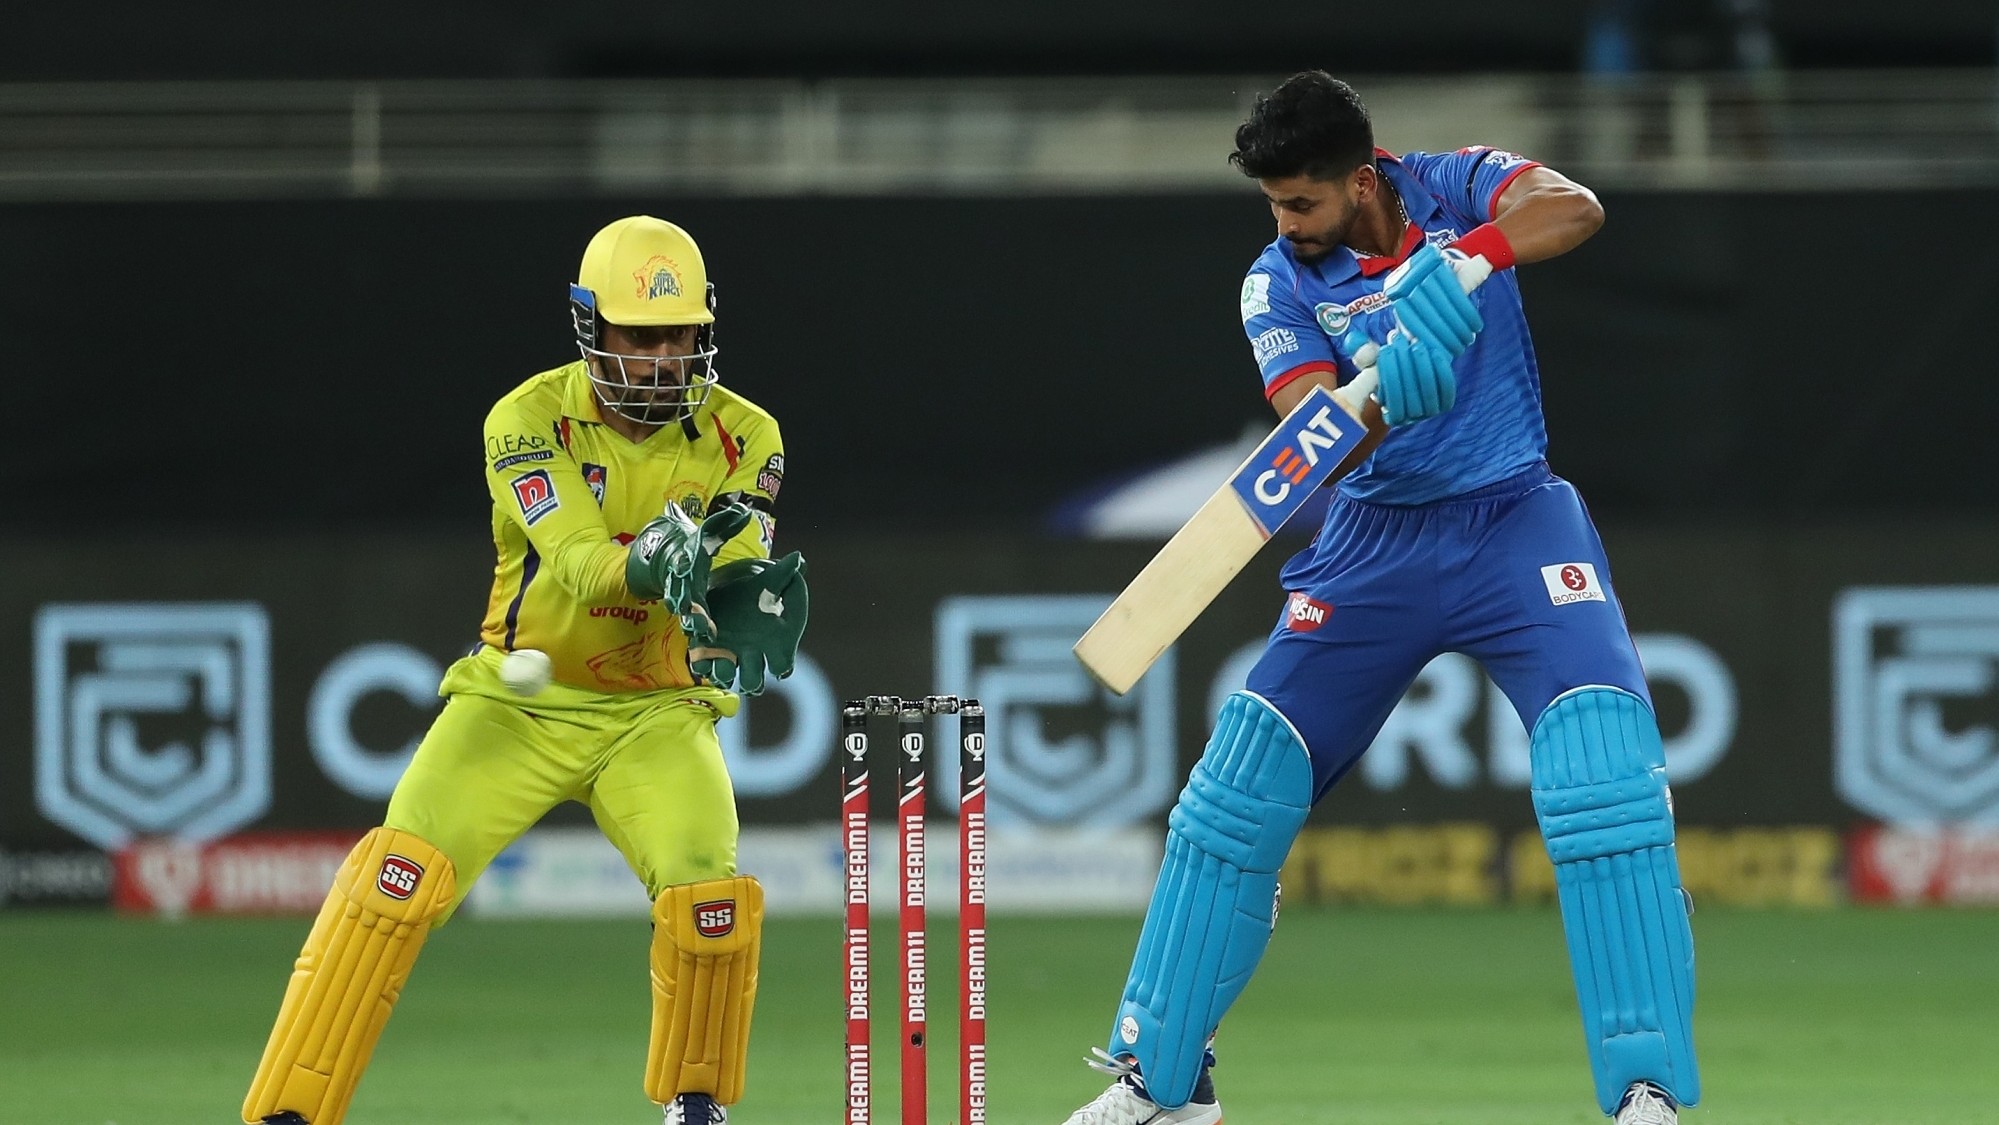 IPL 2020: Shreyas Iyer lauds DC's all-round performance after massive win over CSK 